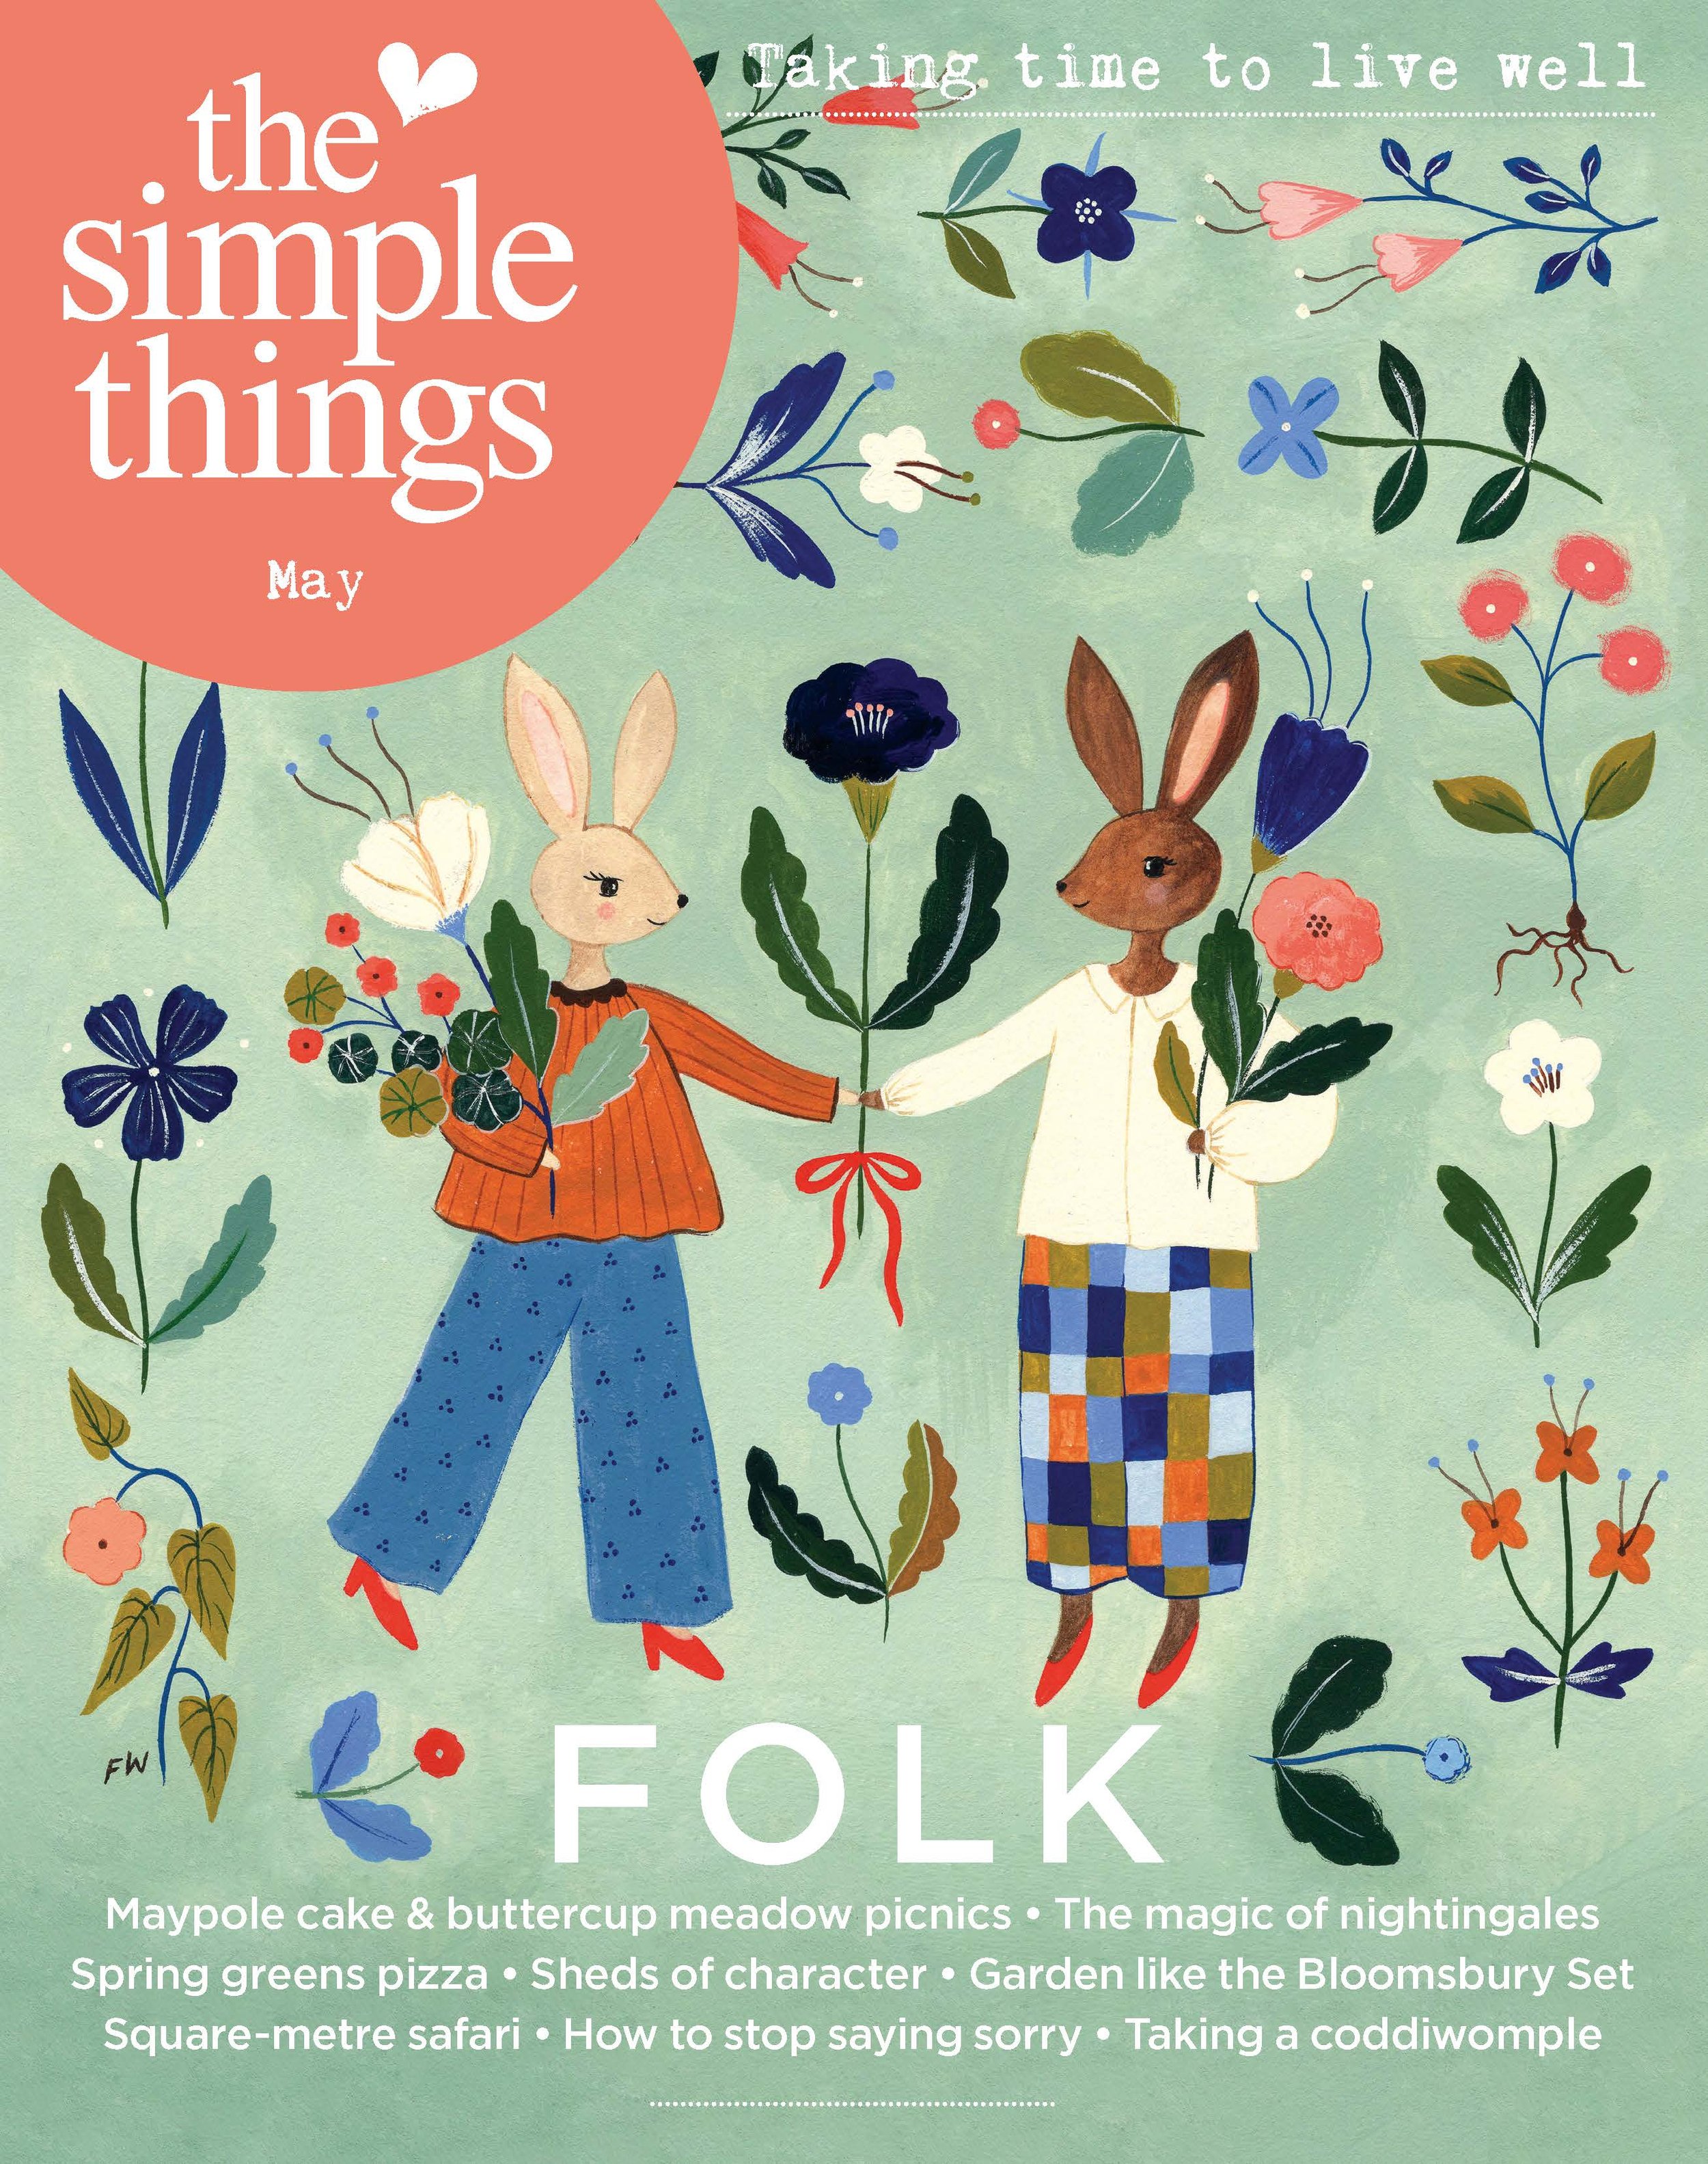  MAY ISSUE   Buy ,  download  or  subscribe   See the sample of our latest issue  here   Buy a copy of Flourish 2, our  wellbeing bookazine , or our  Everyday Anthology .  Listen to our new podcast -  Small Ways to Live Well  